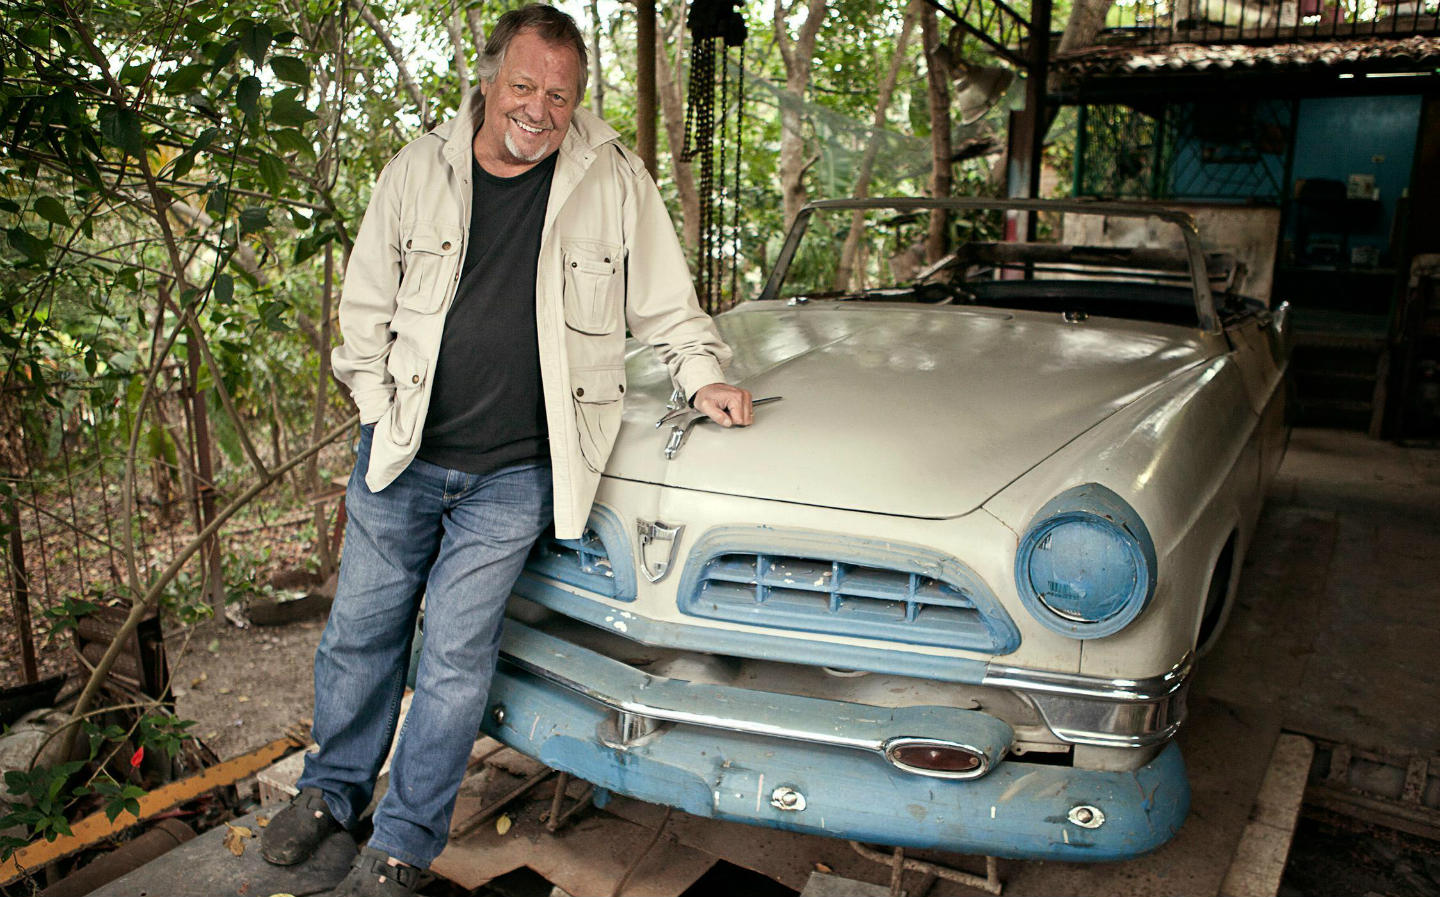 Starsky & Hutch actor David Soul on his mission to restore a historic Chrysler